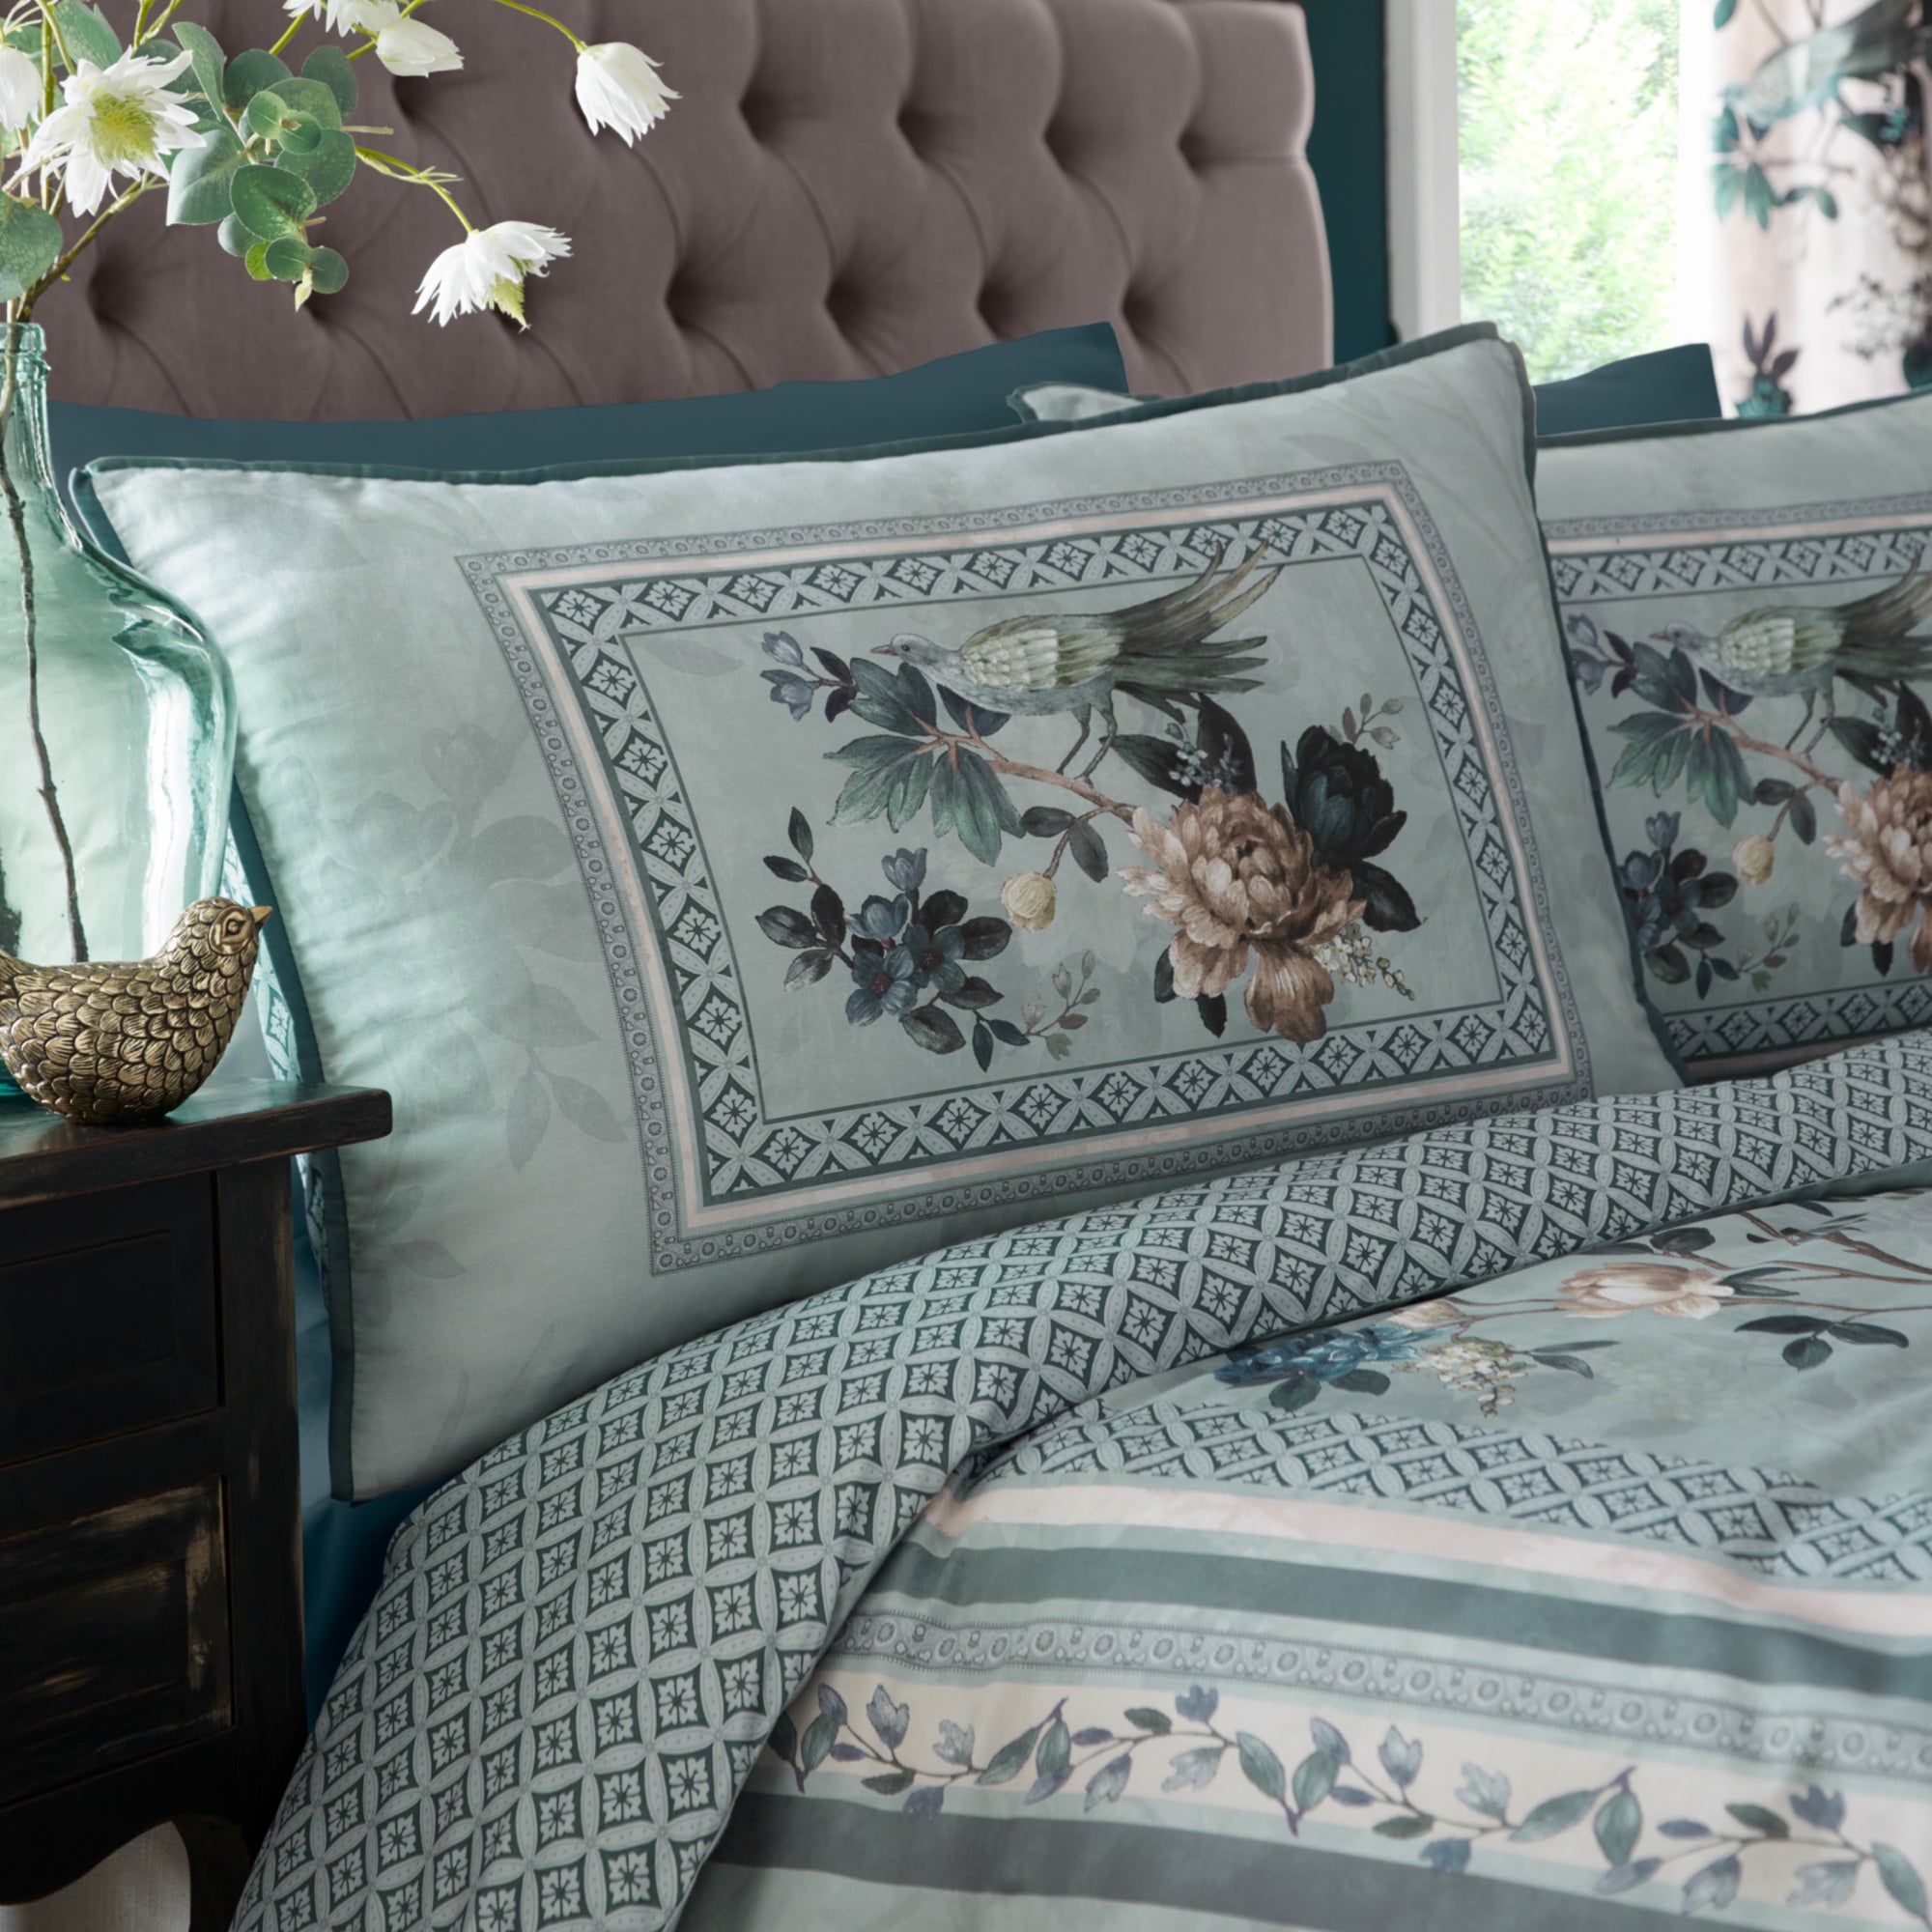 Duvet Cover Set Windsford by Appletree Heritage in Teal